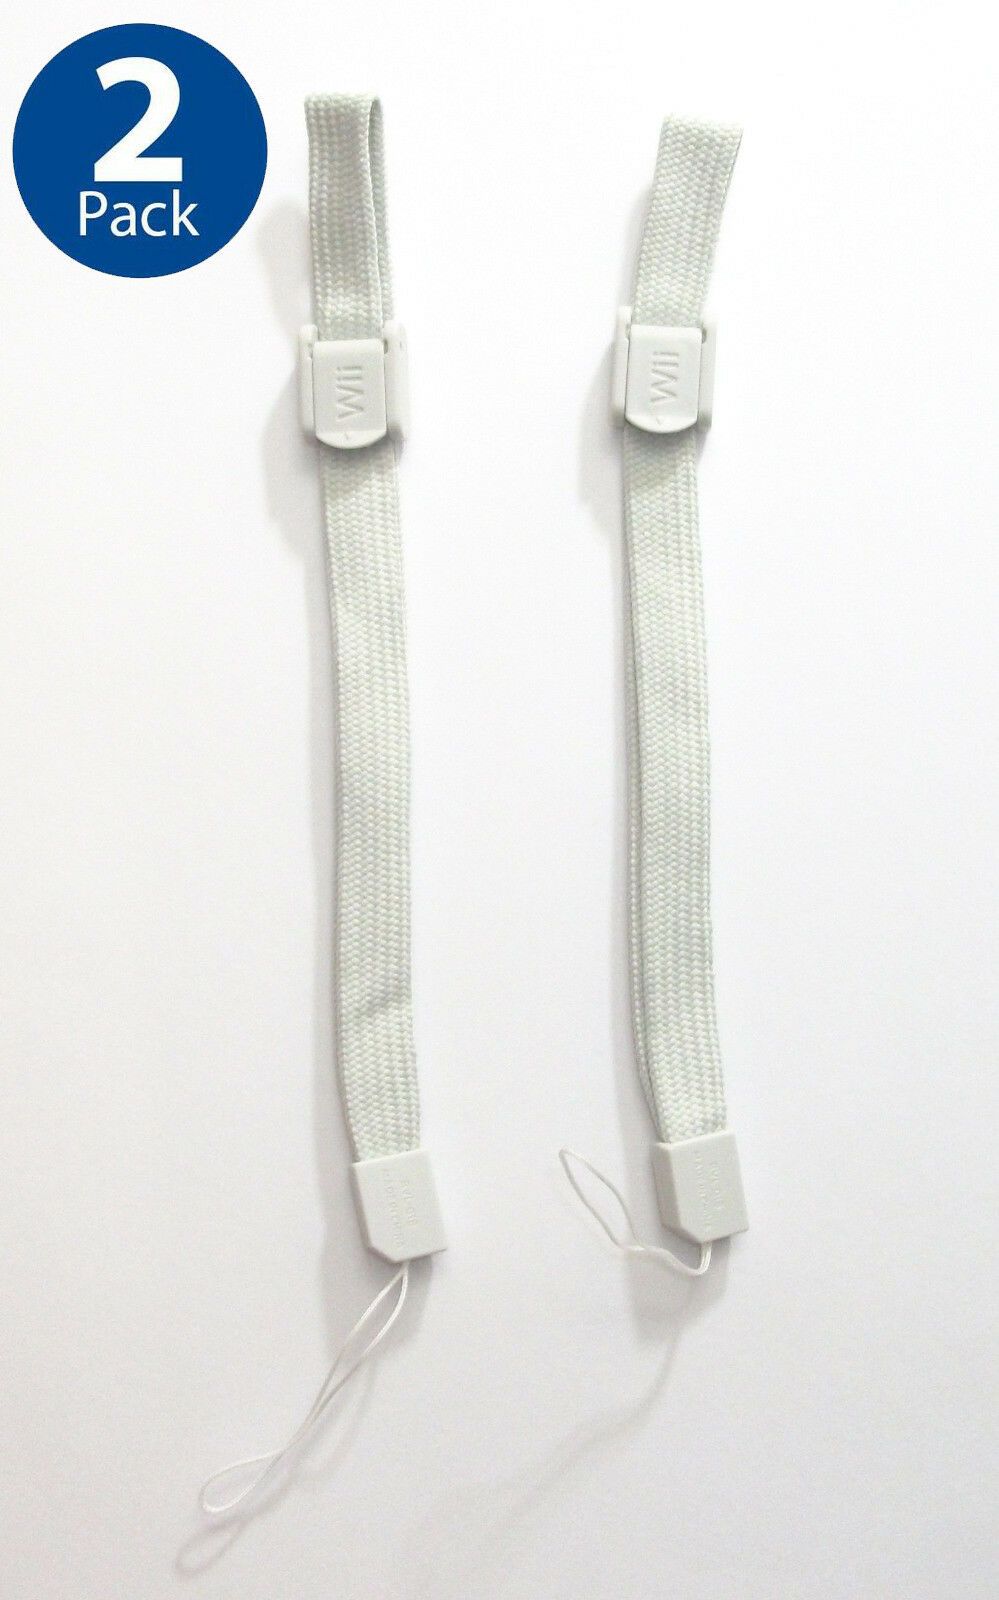 USA SELLER OFFICIAL Wii Wii U Wrist Strap Hand Strap Lanyard GRAY GREY LOT of 2